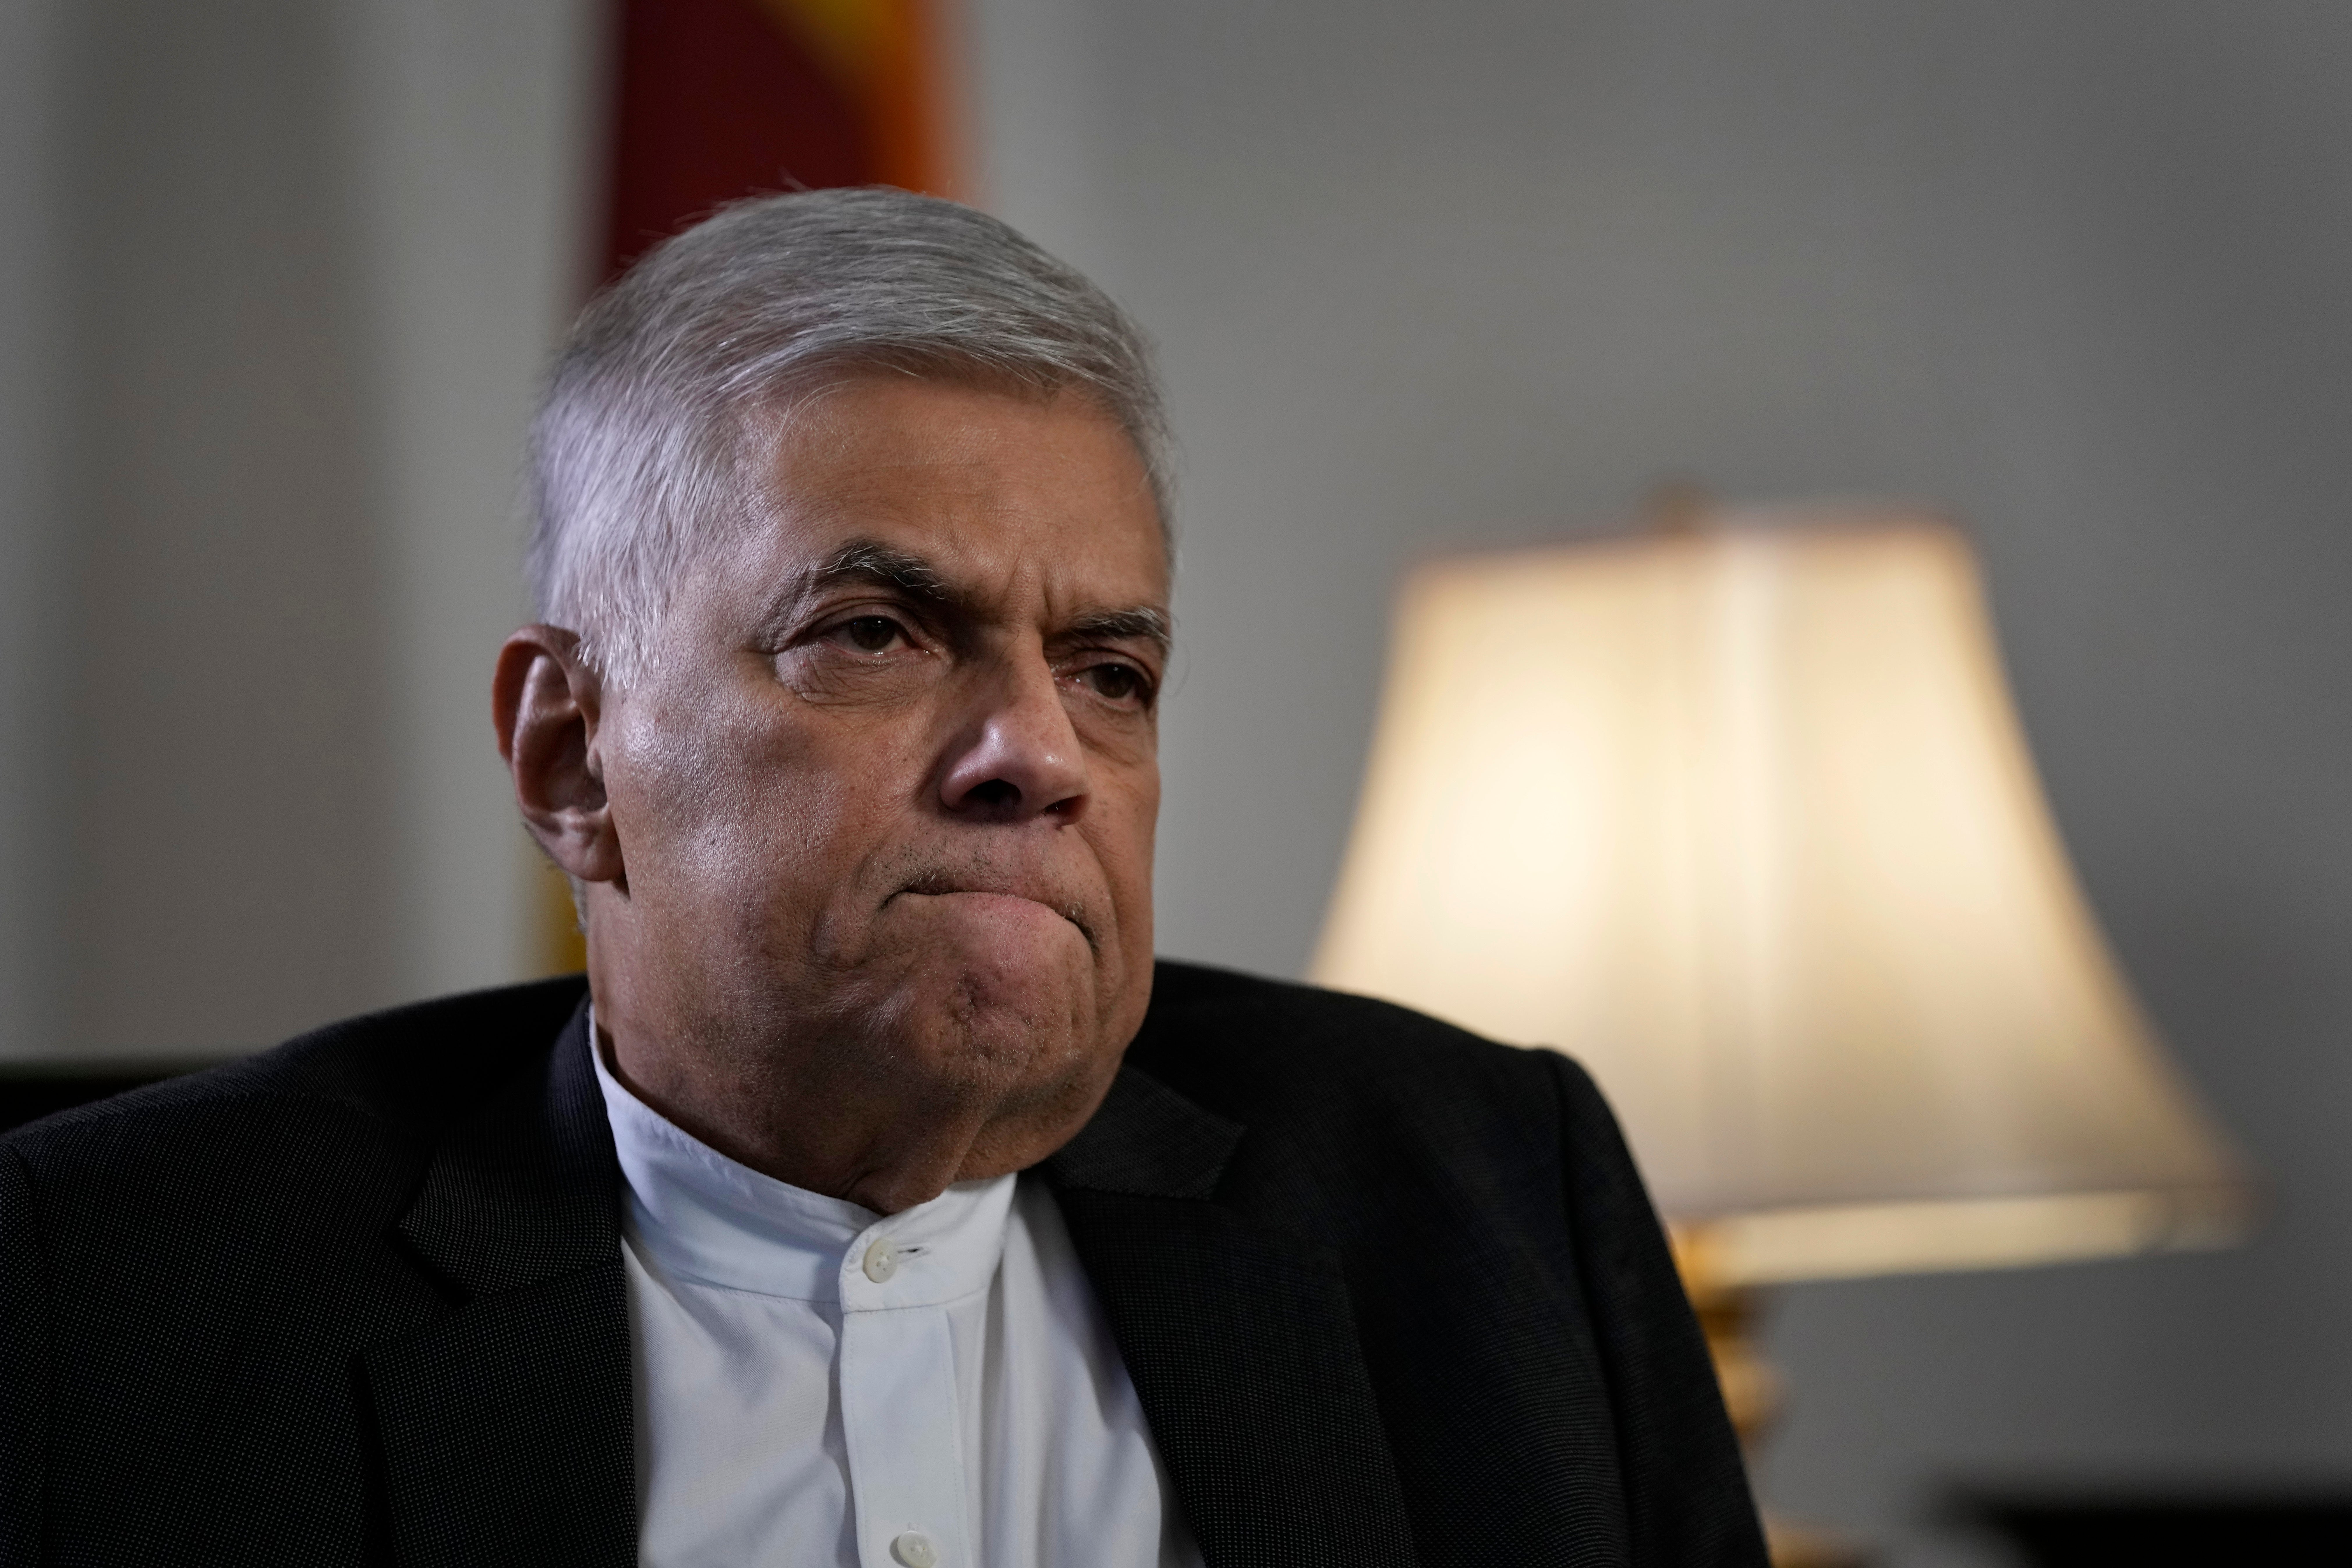 Ranil Wickremesinghe gestures during an interview with The Associated Press in Colombo on 11 June